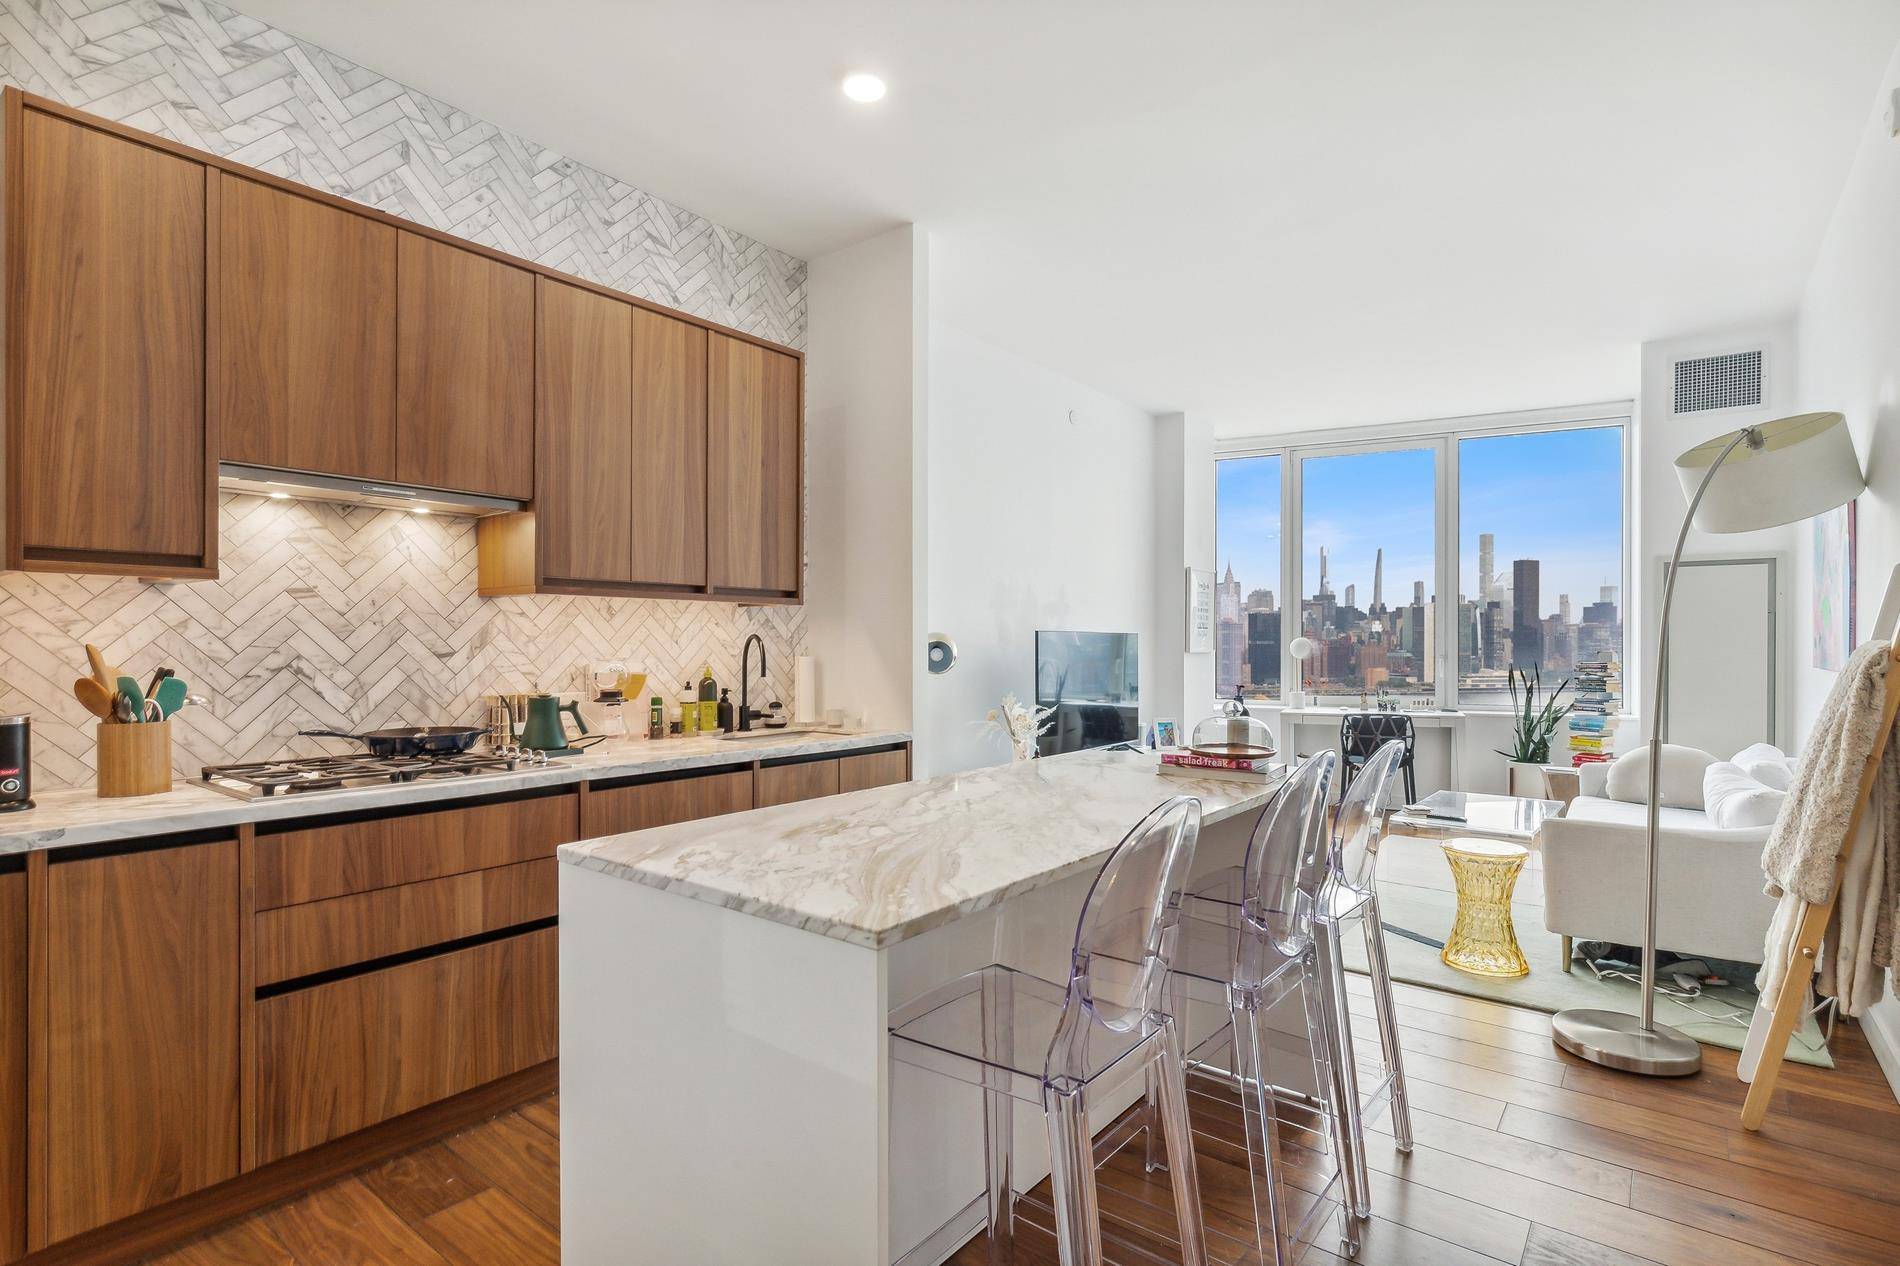 One of the best lines in the building with spectacular views of Manhattan, East River, and Long Island City.